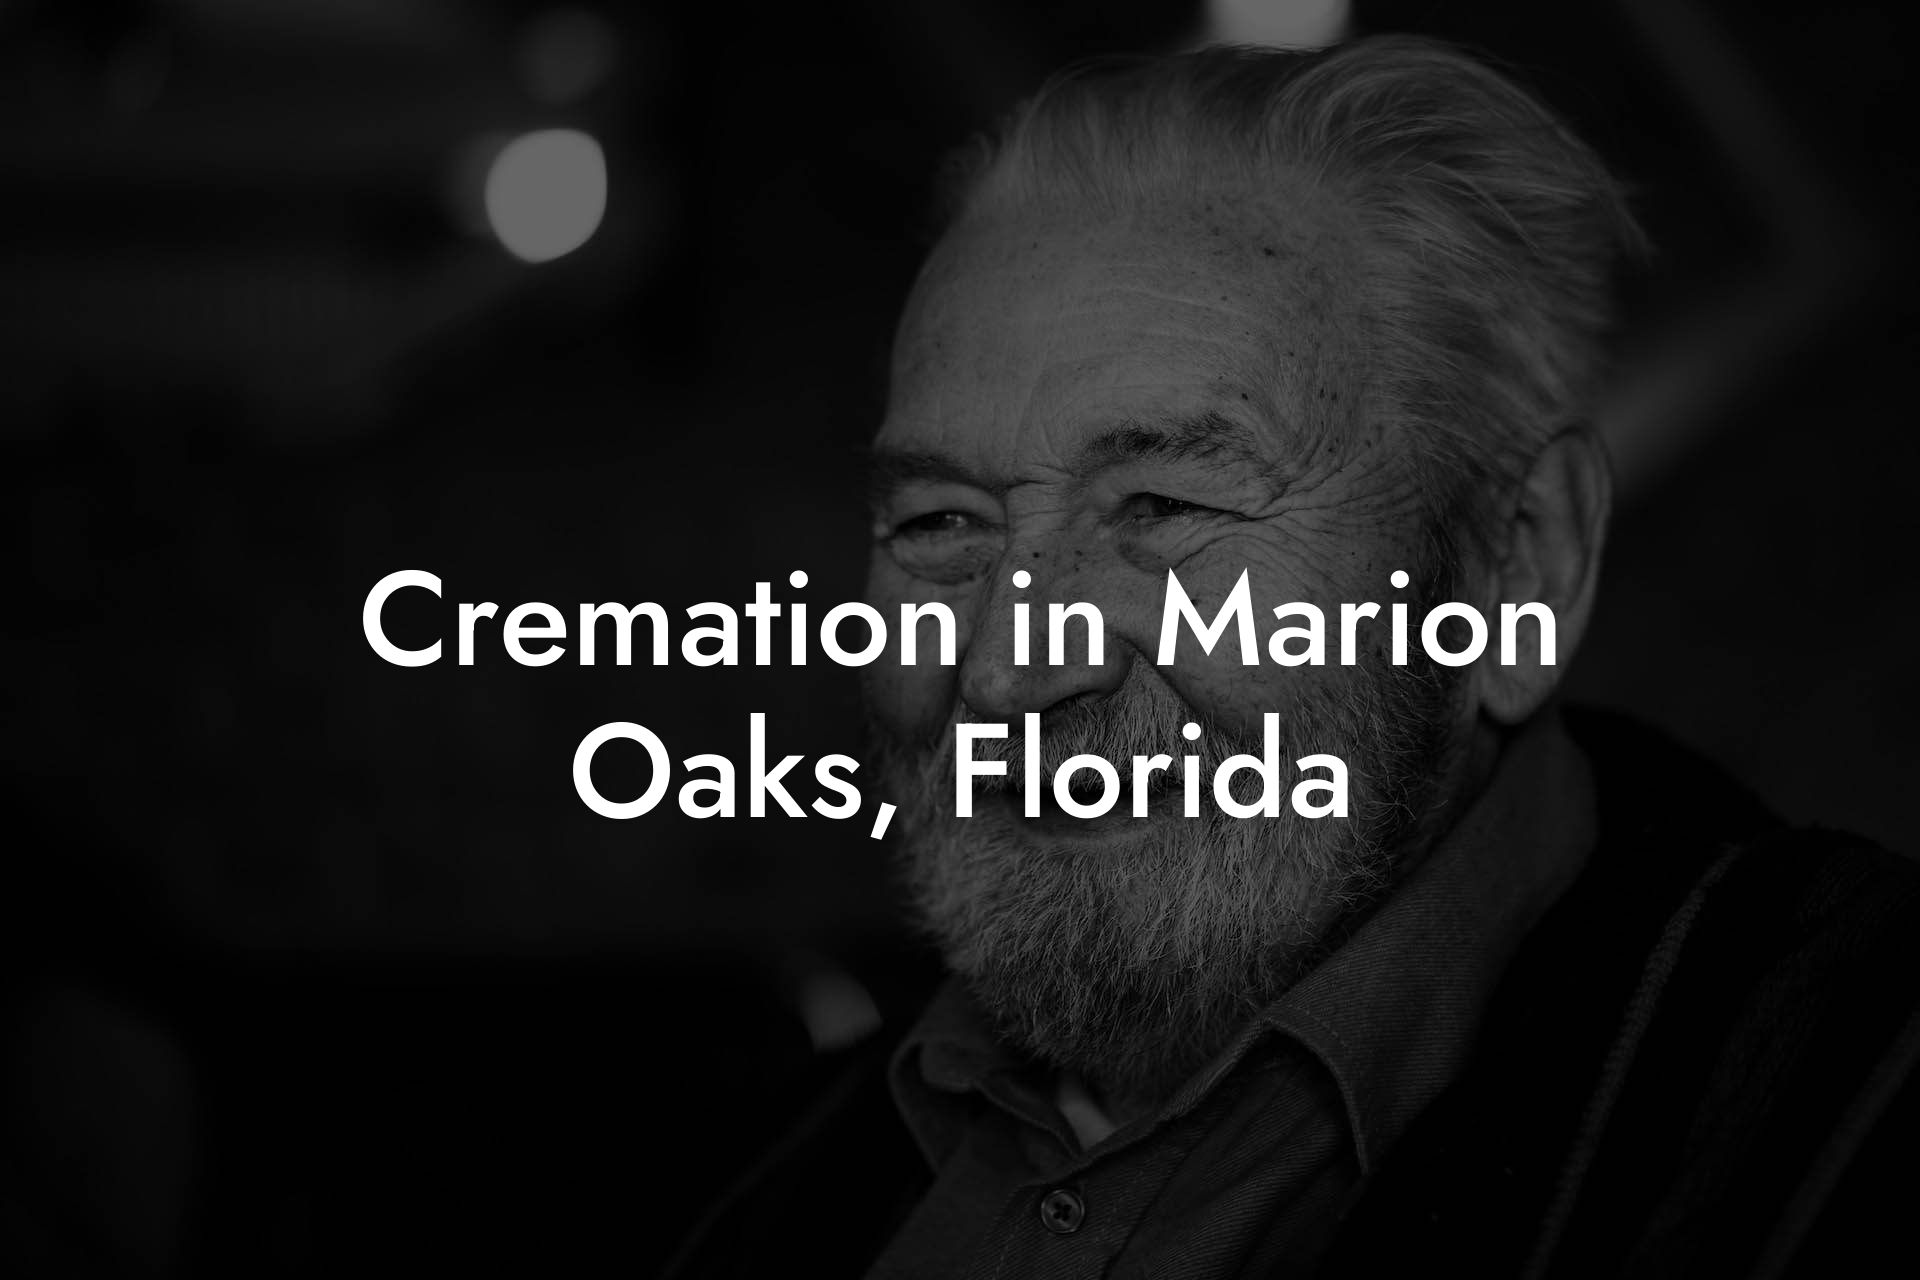 Cremation in Marion Oaks, Florida